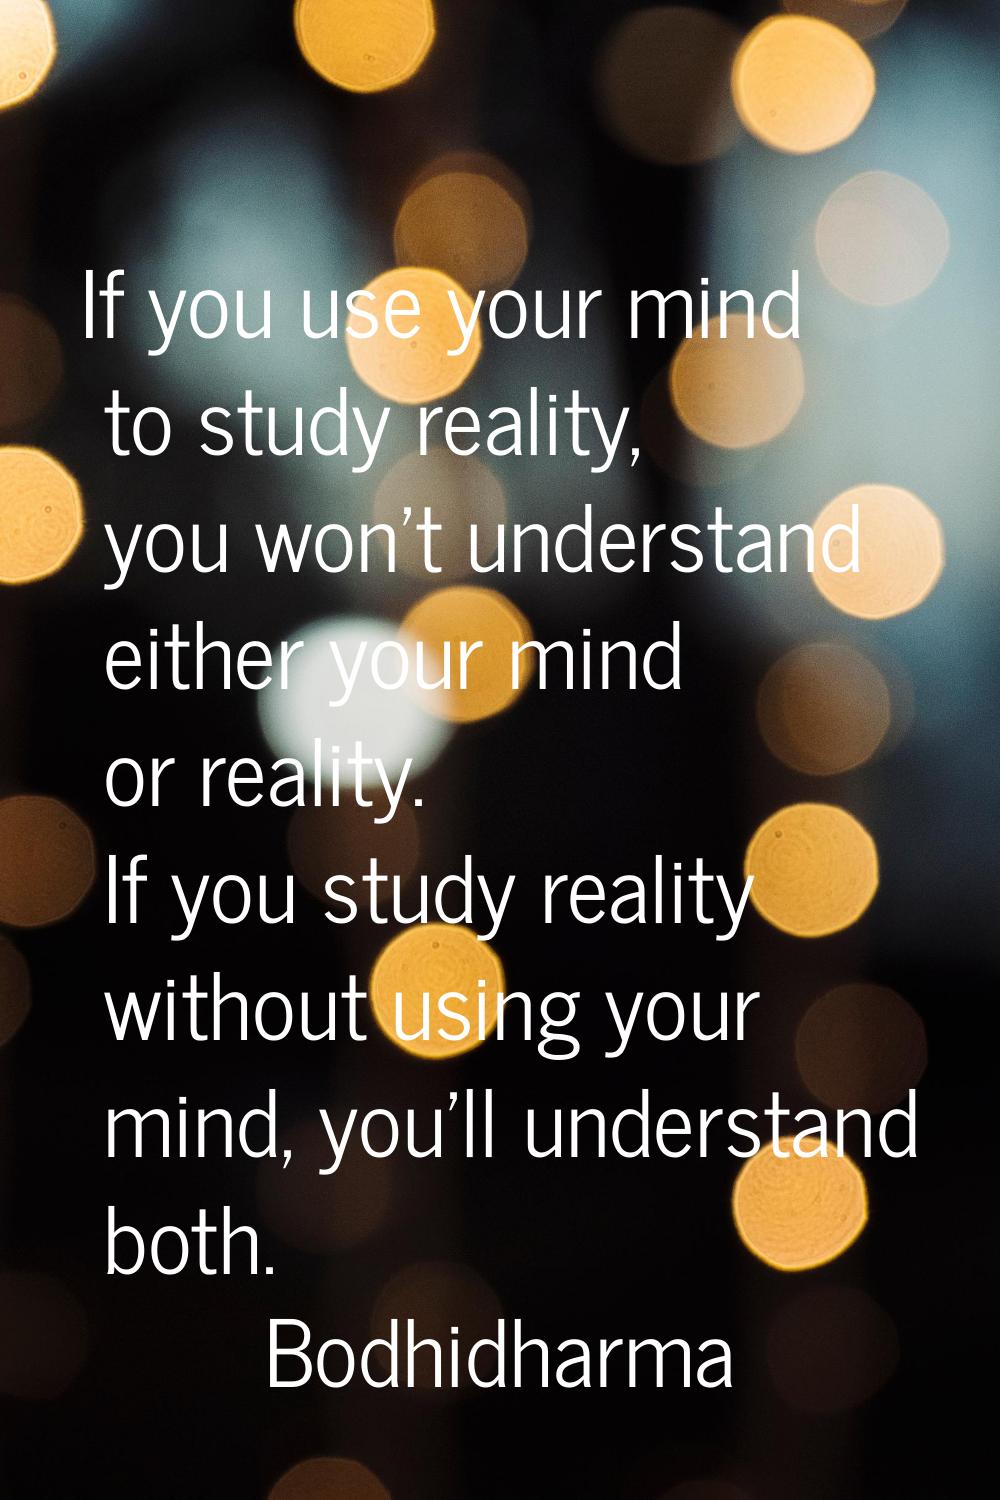 If you use your mind to study reality, you won't understand either your mind or reality. If you stu